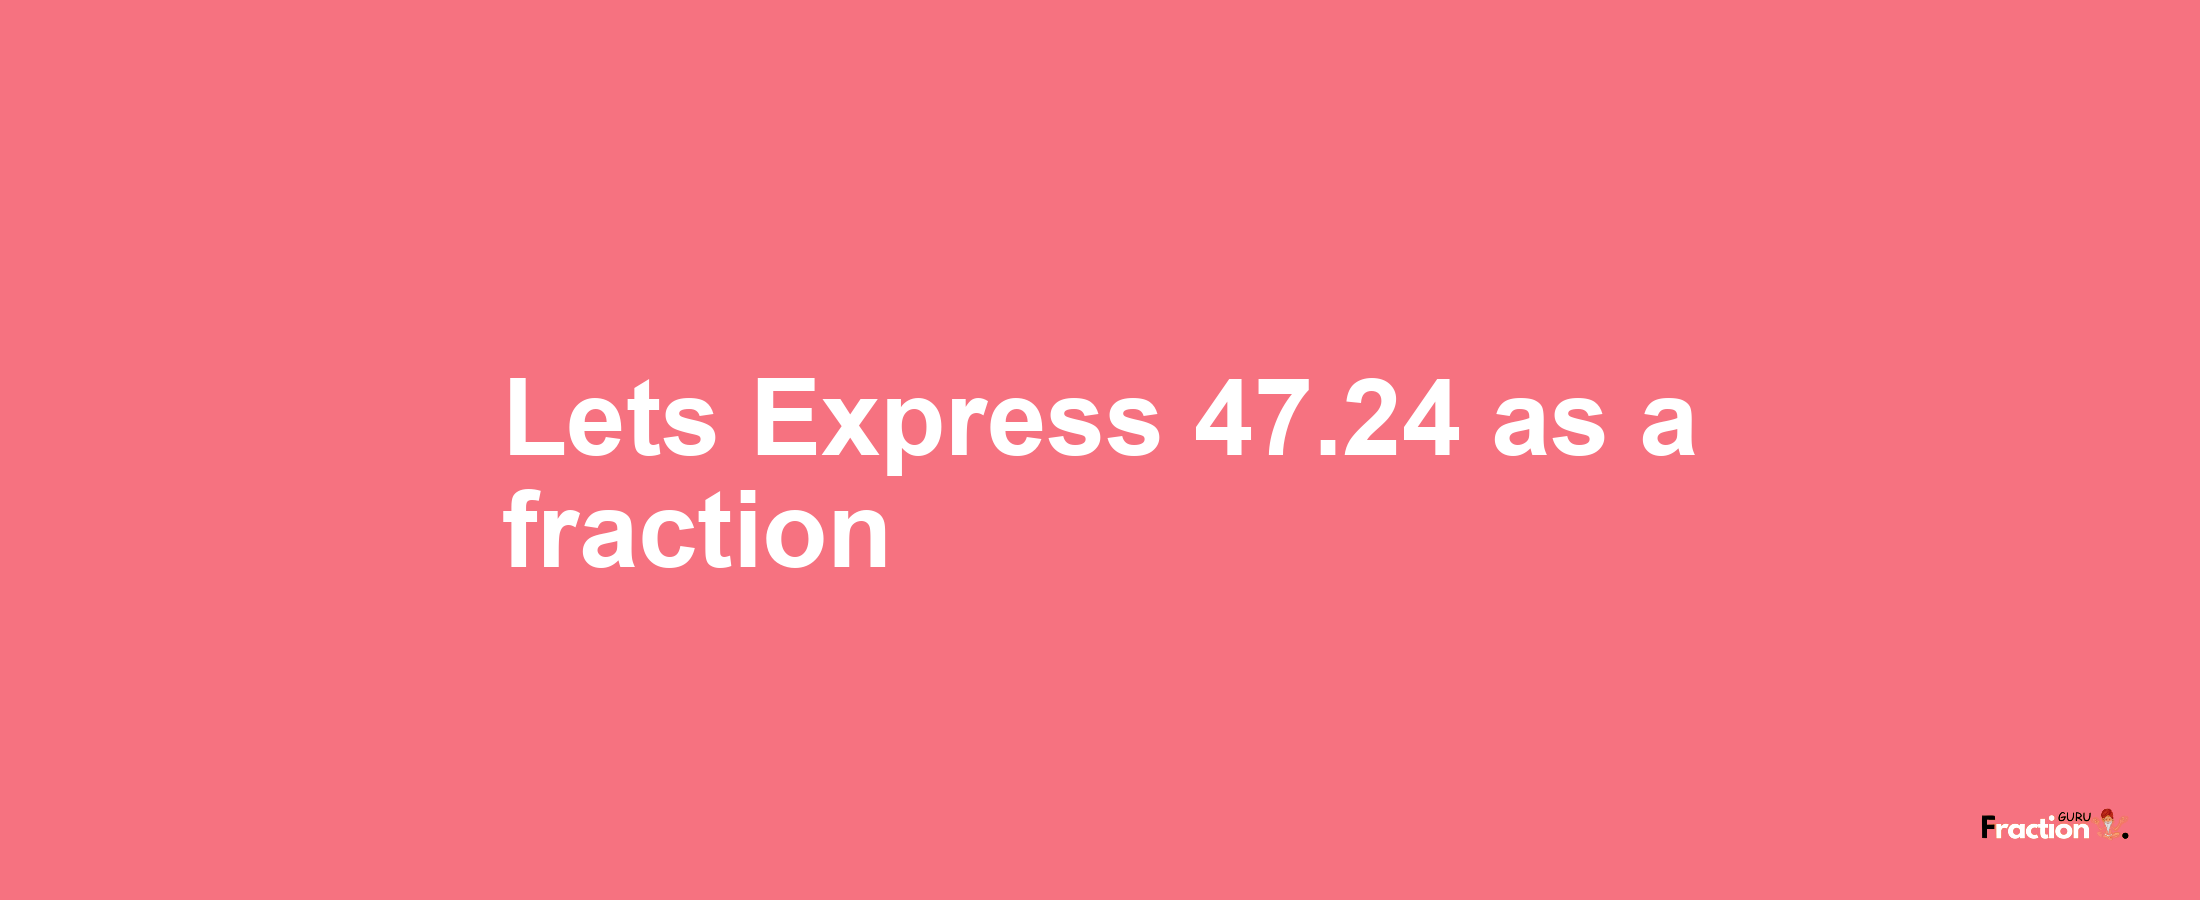 Lets Express 47.24 as afraction